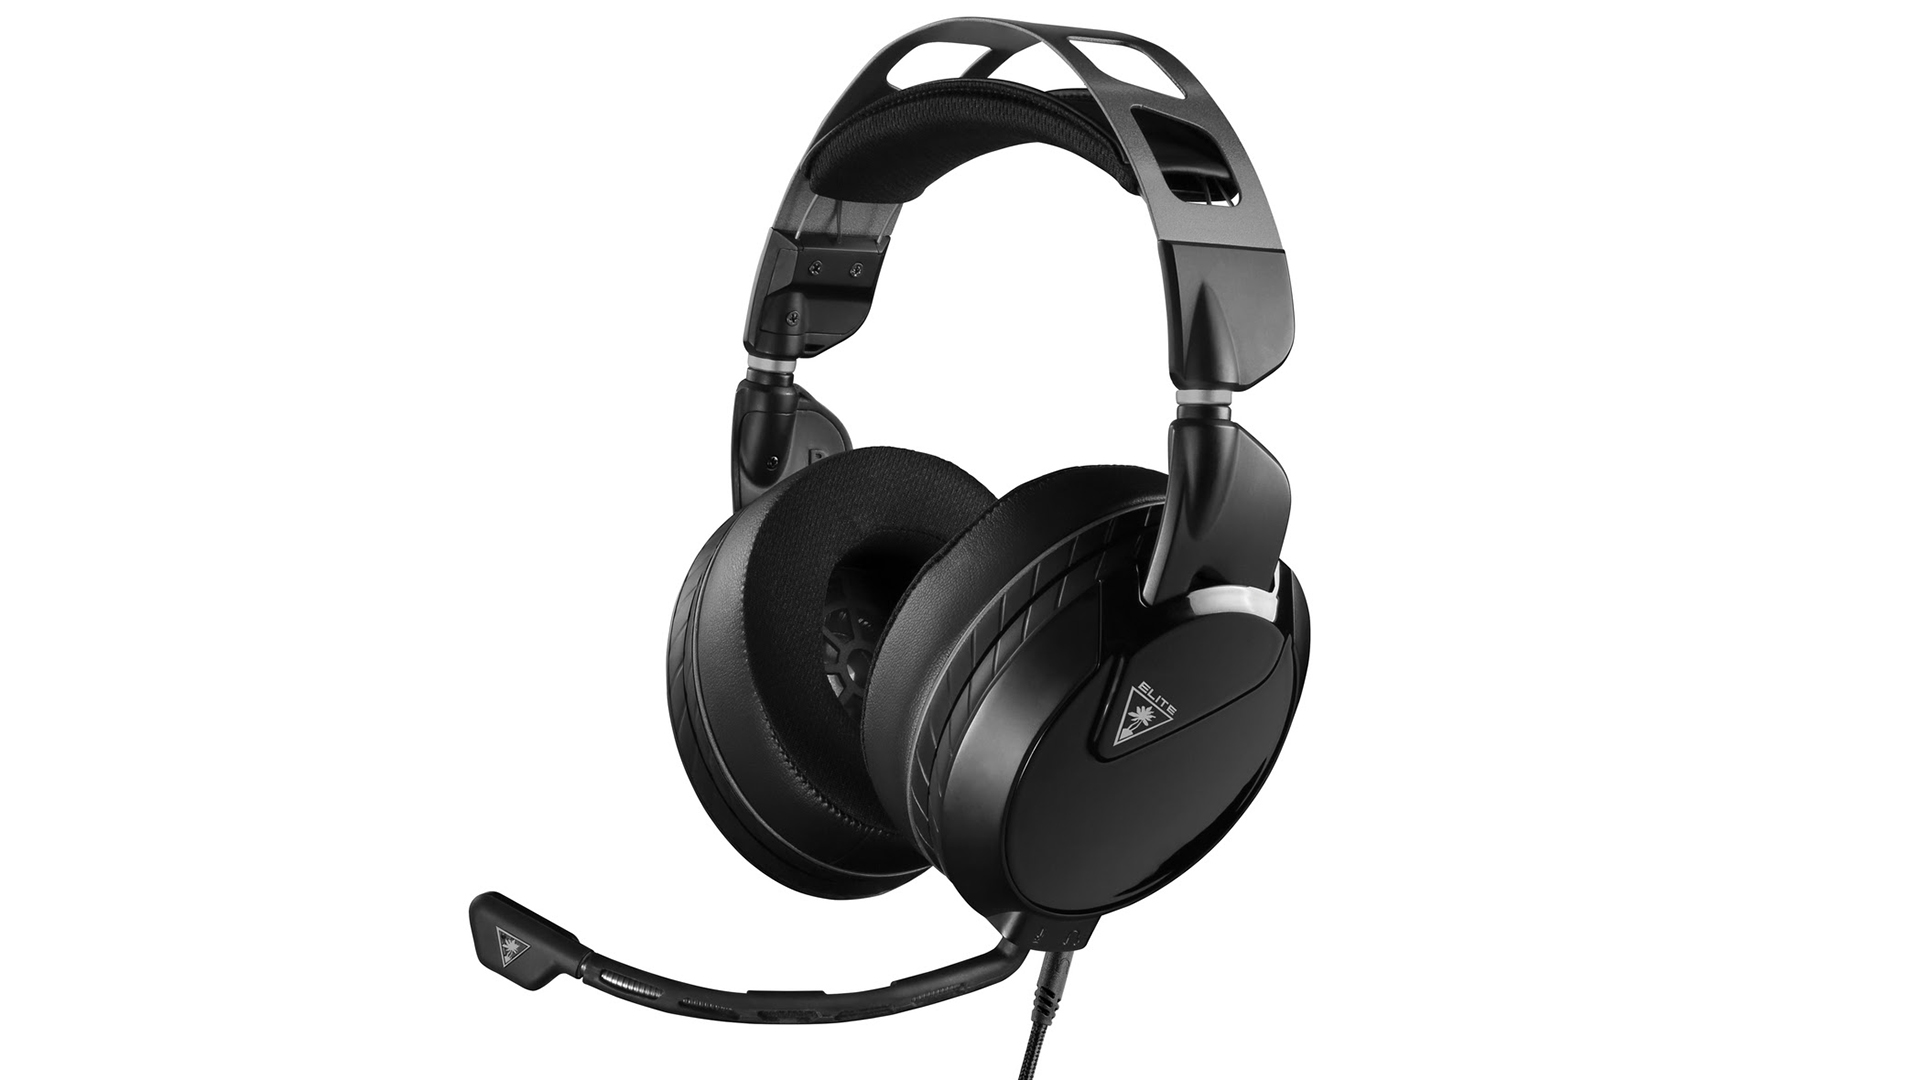 Turtle Beach announces expansion into PC gaming with Atlas headset